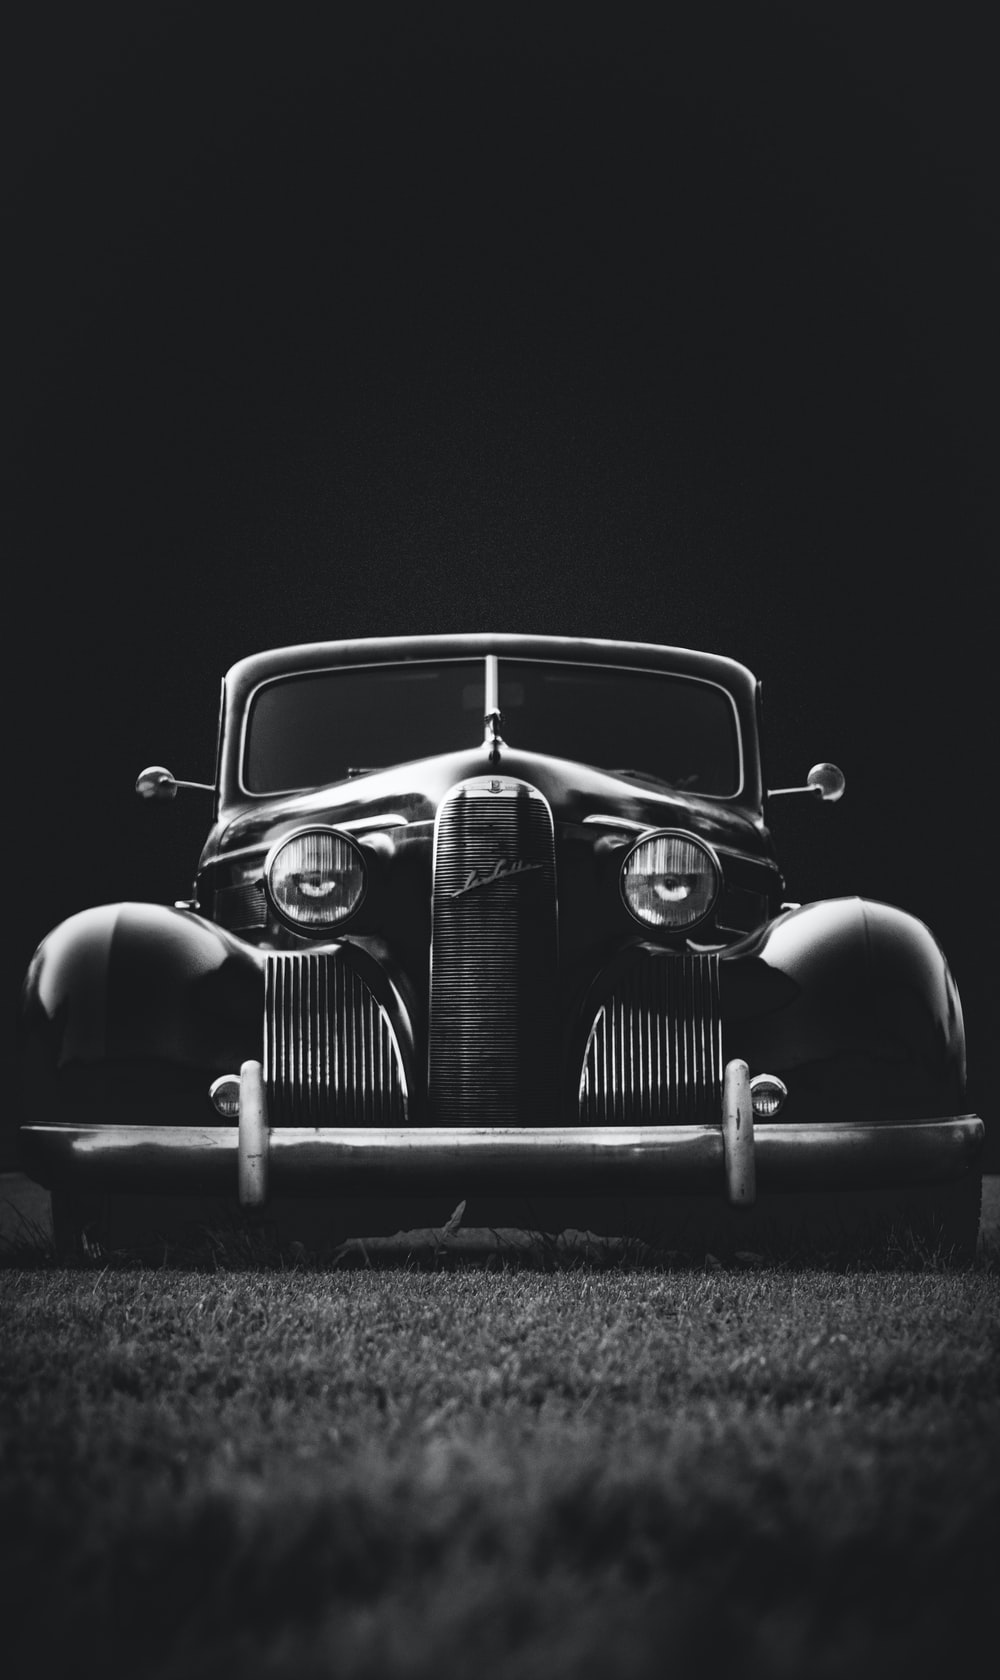 Black And White Car Picture. Download Free Image